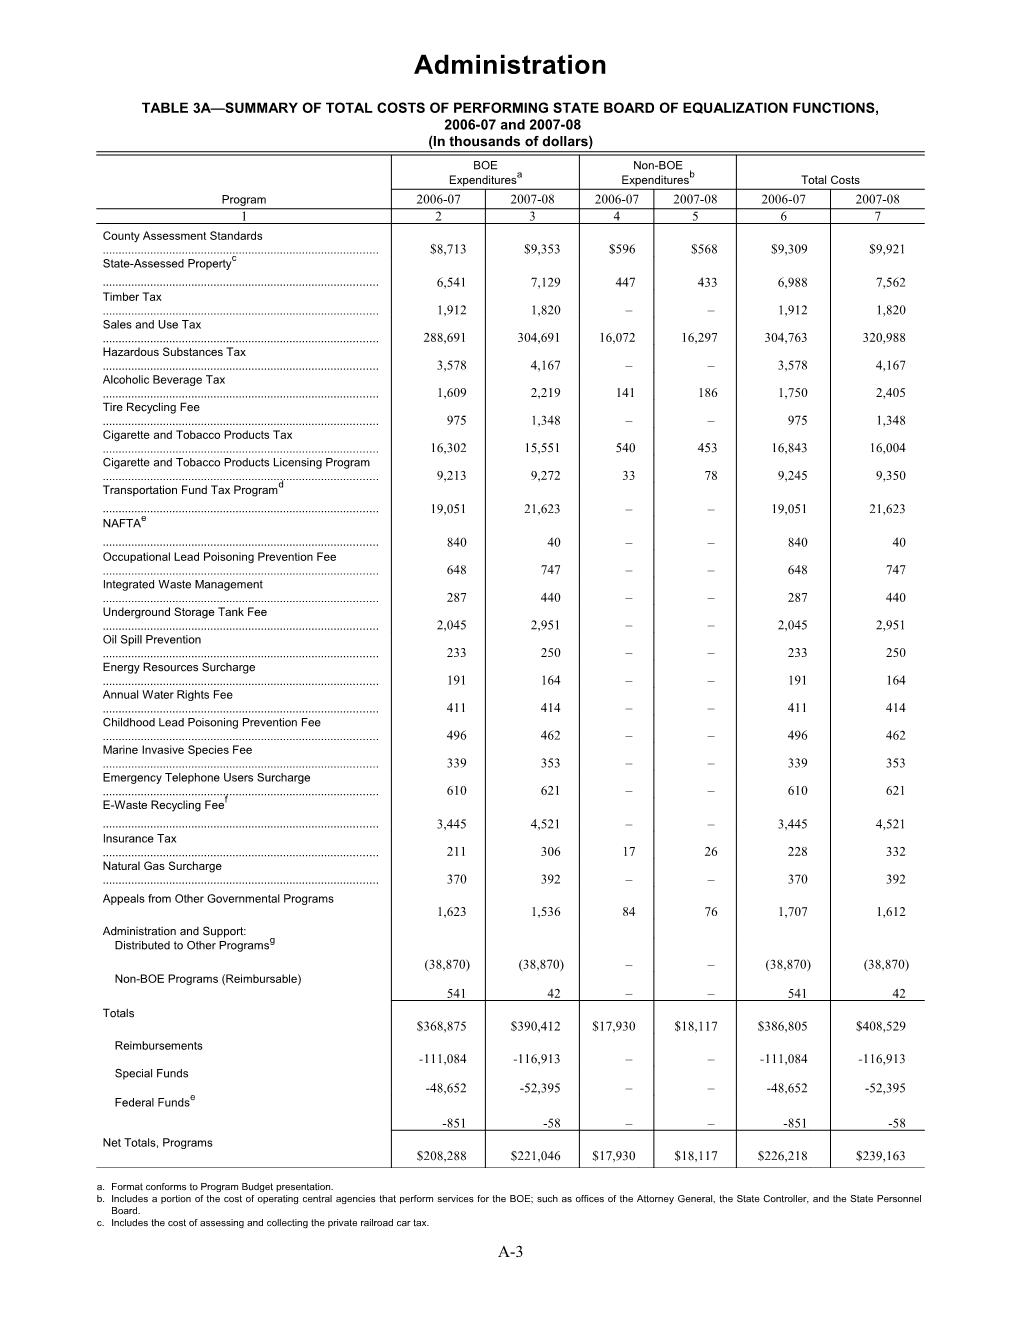 Table 3A Summary of Total Costs of Performing State Board of Equalization Functions